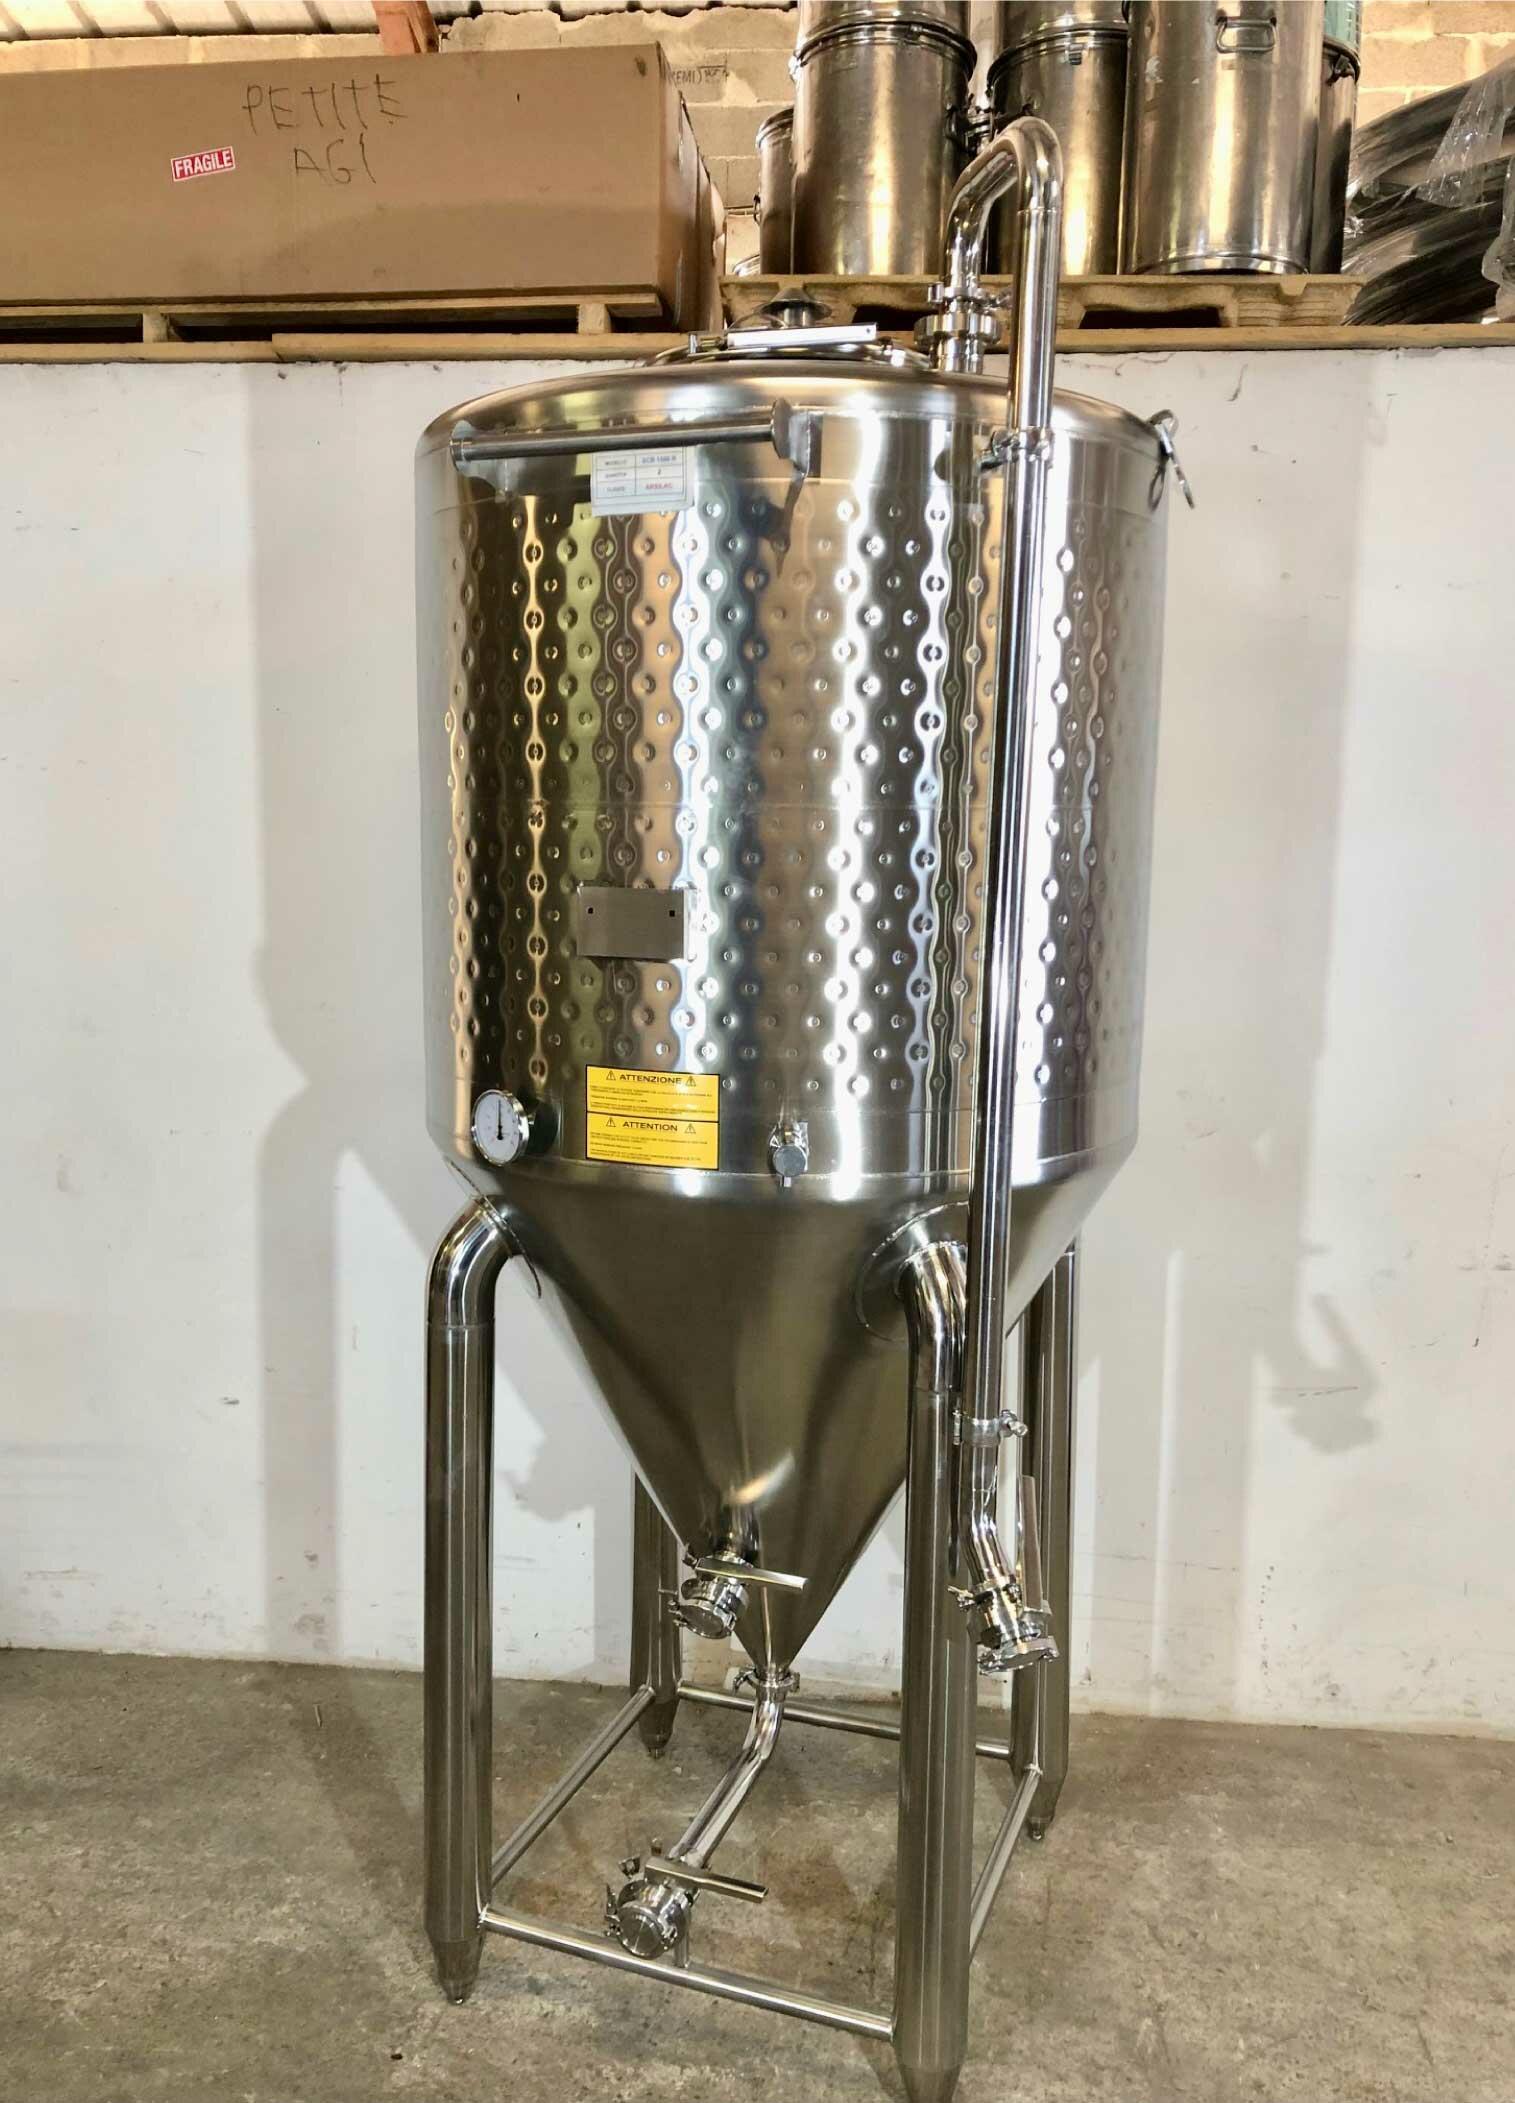 304 stainless steel tank - Cylindro-conical - Closed - On feet